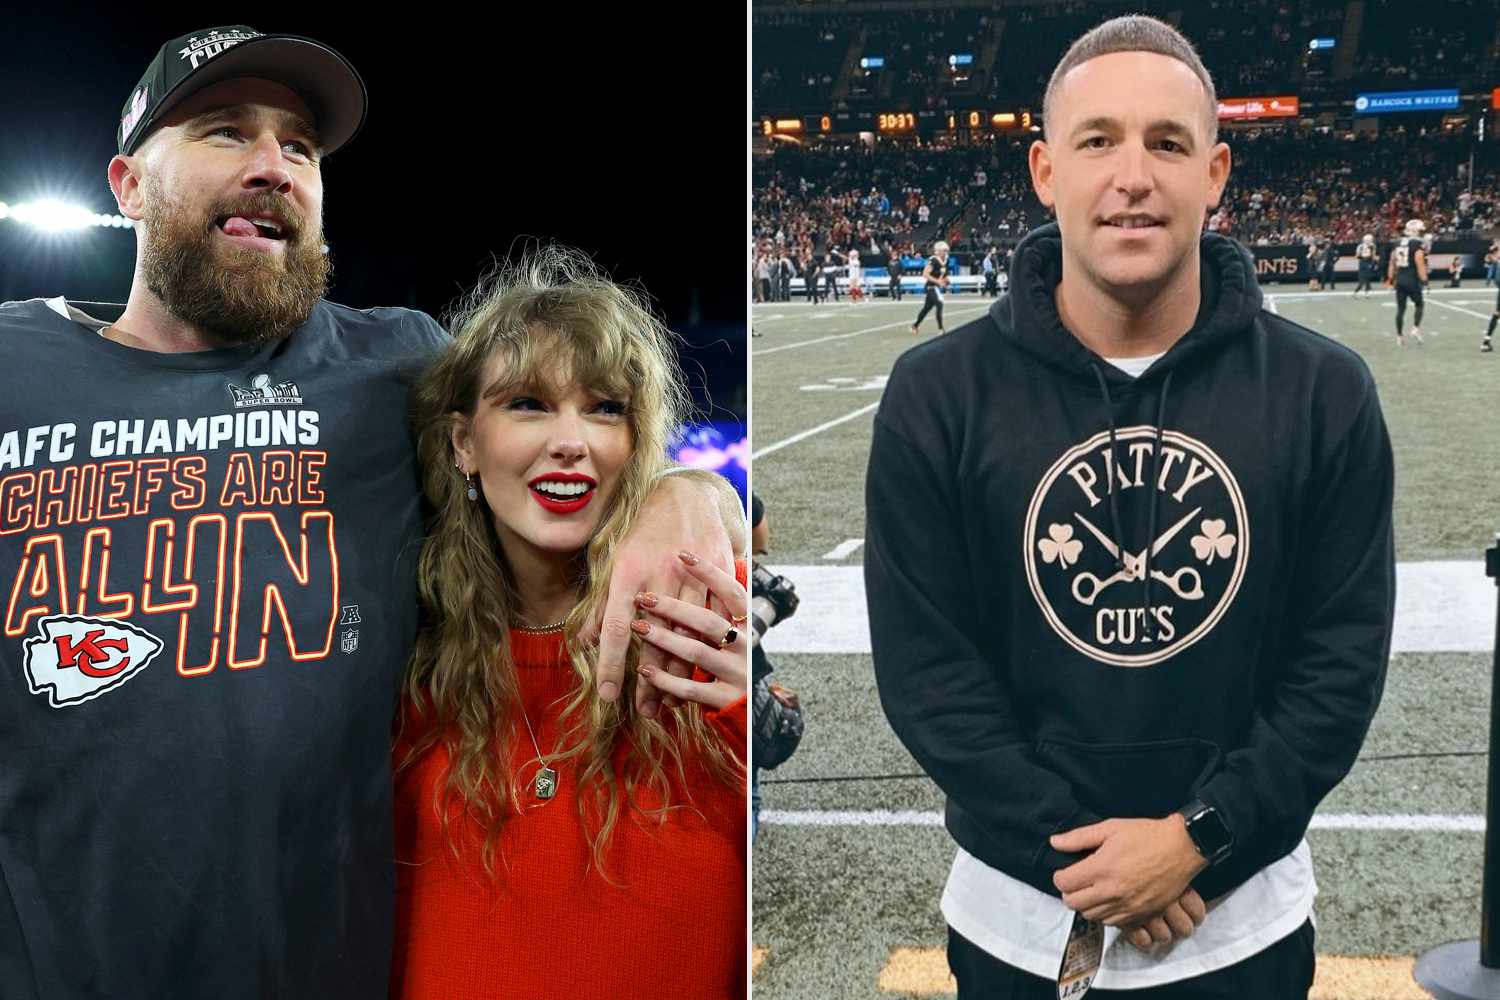 Travis Kelce's Barber Says Taylor Swift Is 'a Good Girlfriend' and Their Wedding 'Would Be Fun'